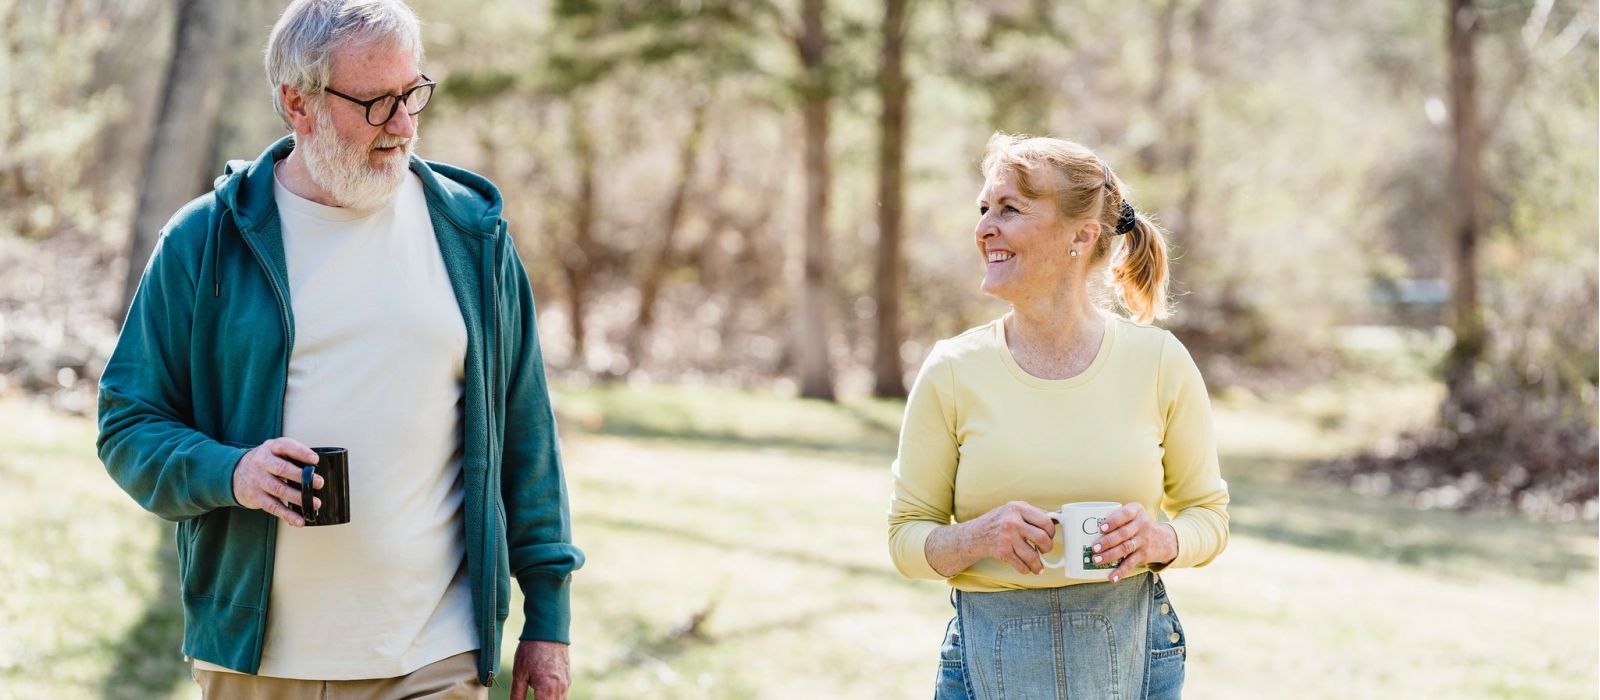 senior couple walking outdoors together both holding coffee cups and looking at each other